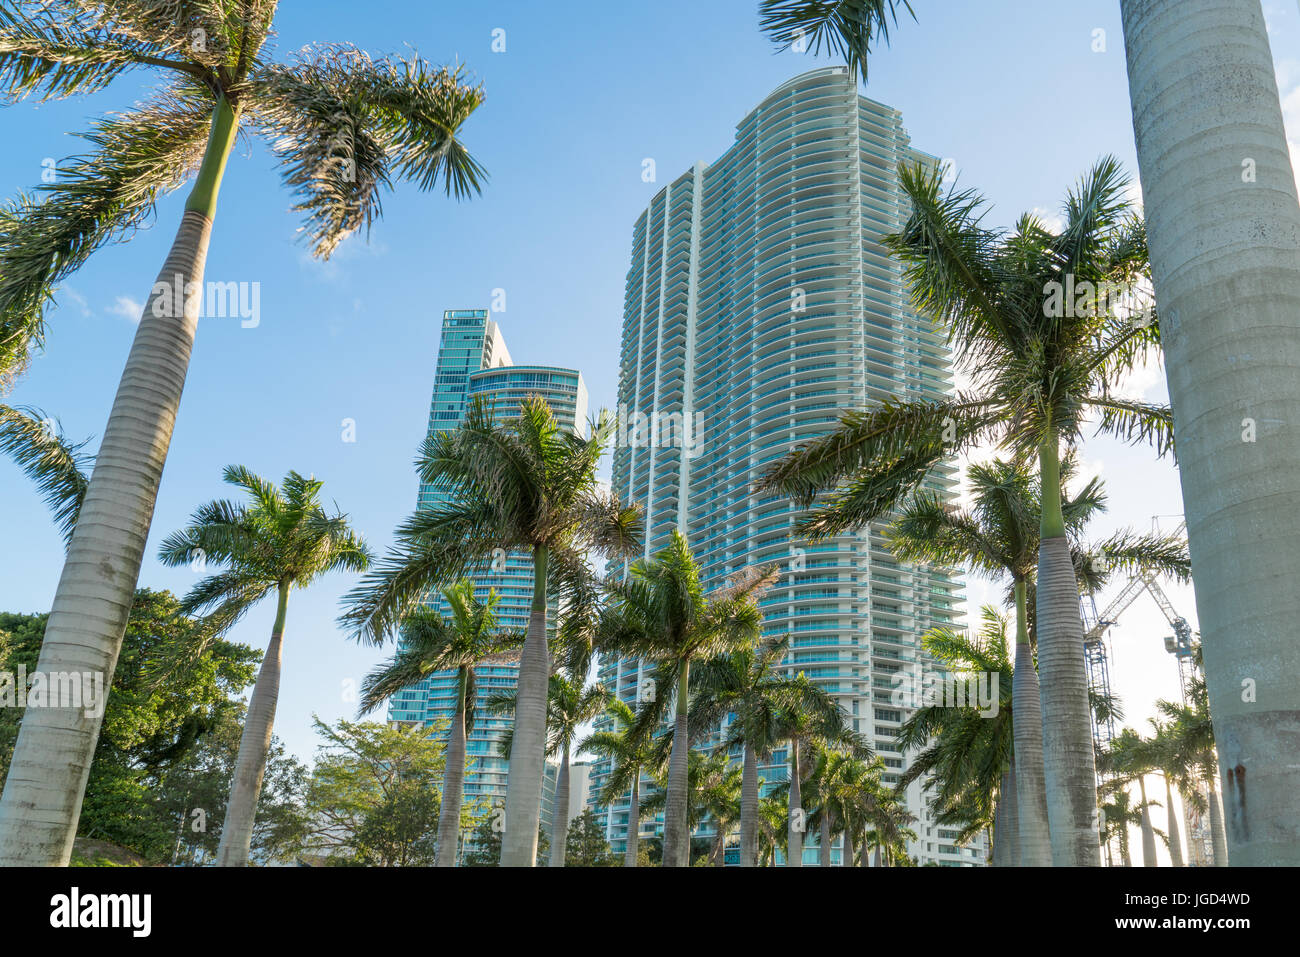 Miami high rise condominiums with rows of palm trees in foreground. Stock Photo